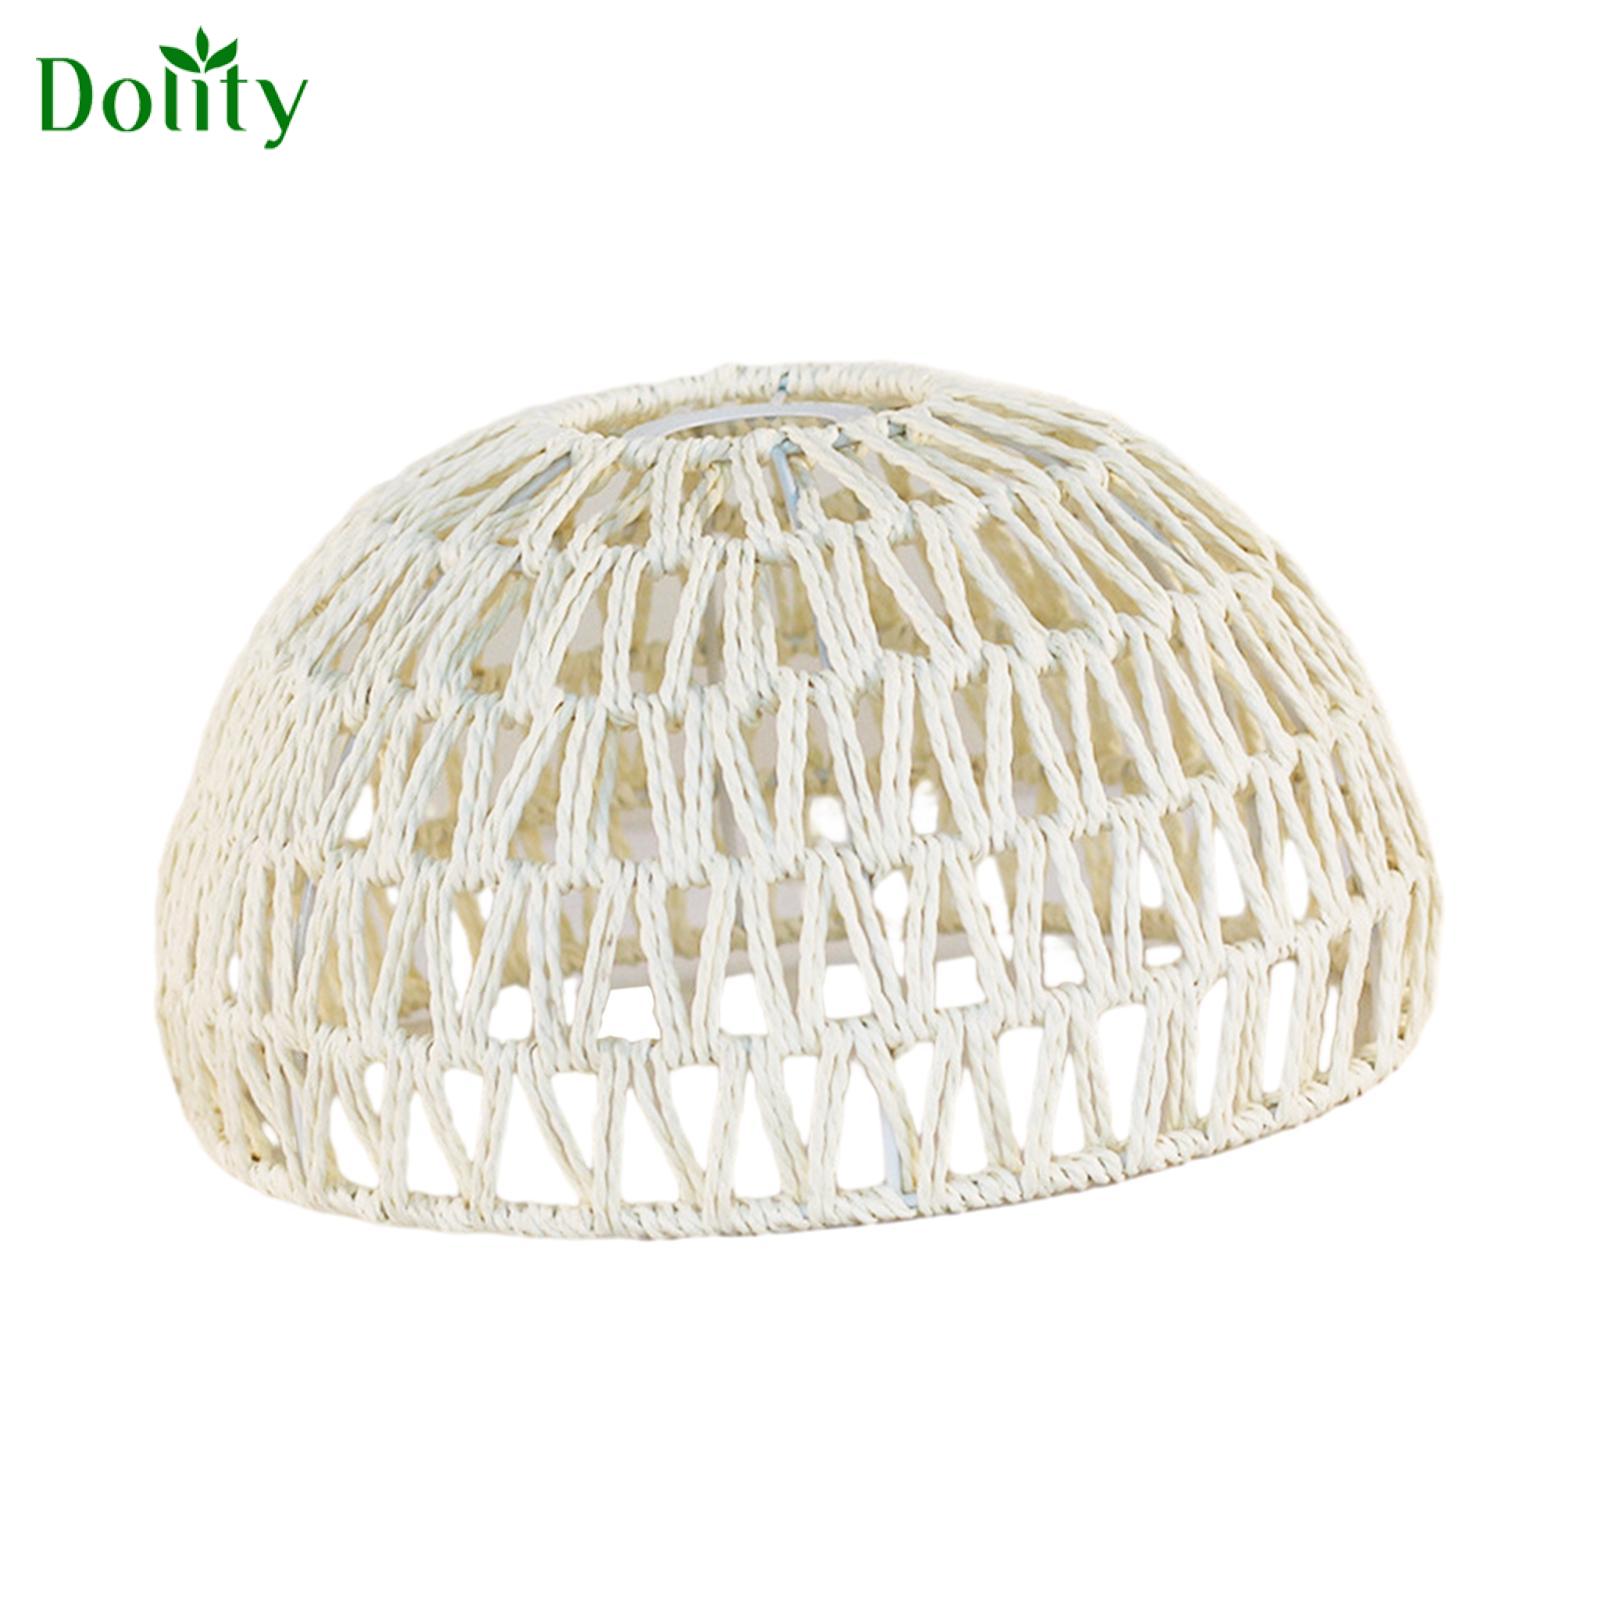 Dolity Paper Rope Lampshade Woven Lamp Shade Chandelier Shade Boho Rustic